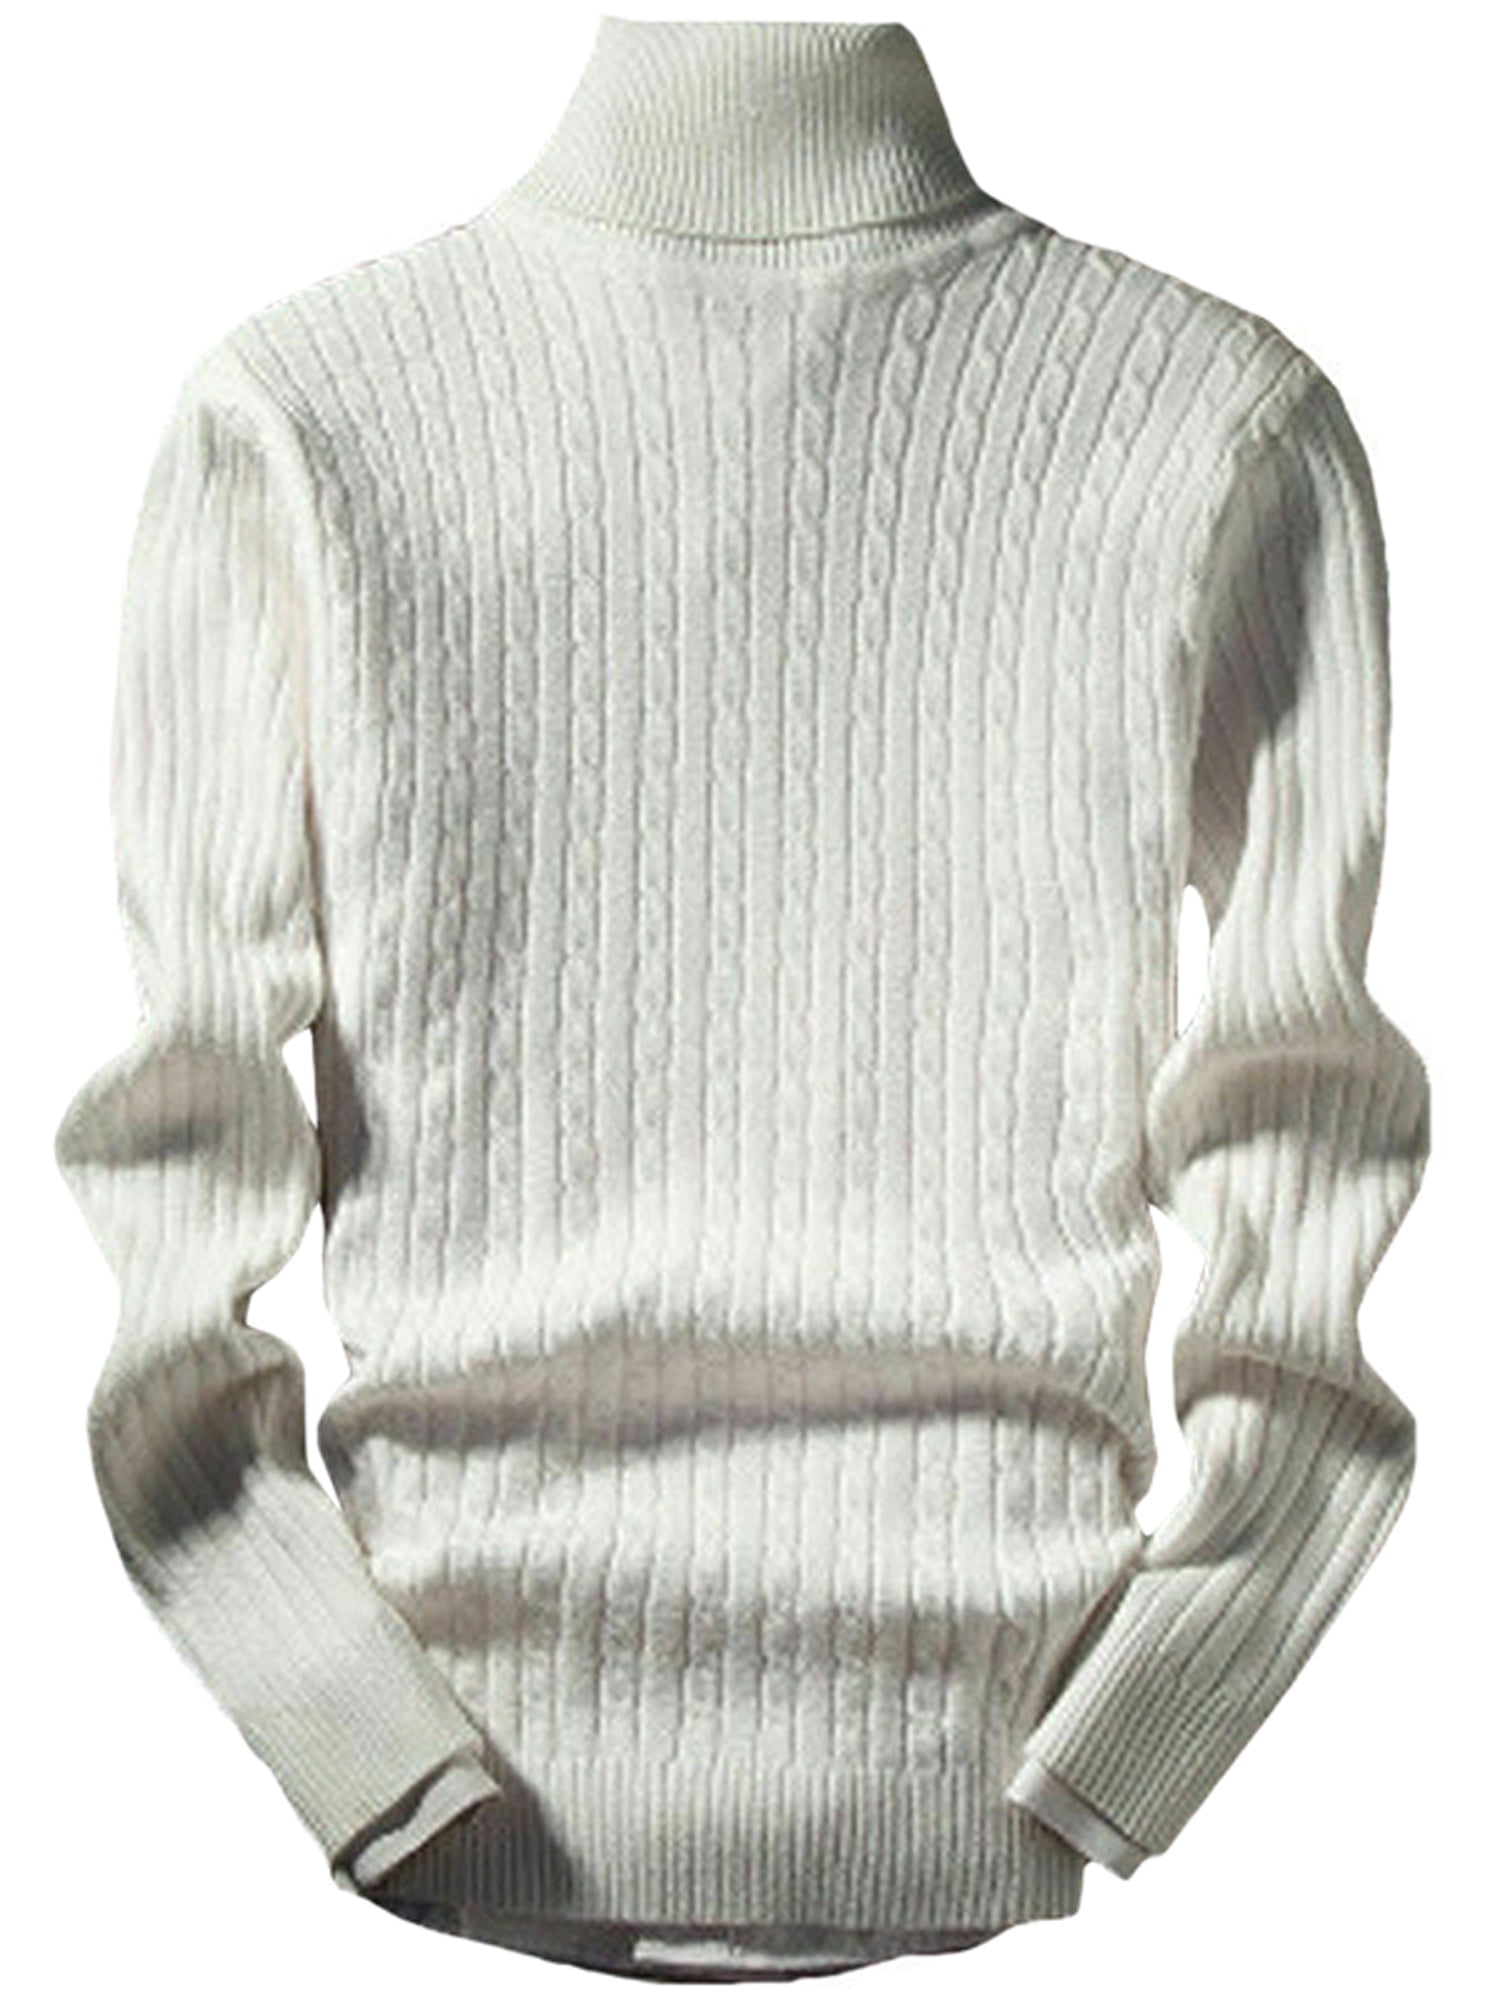 Mens Long Sleeve Knitwear Jumper Zip Up High Neck Sweater Knit Stretchy Pullover